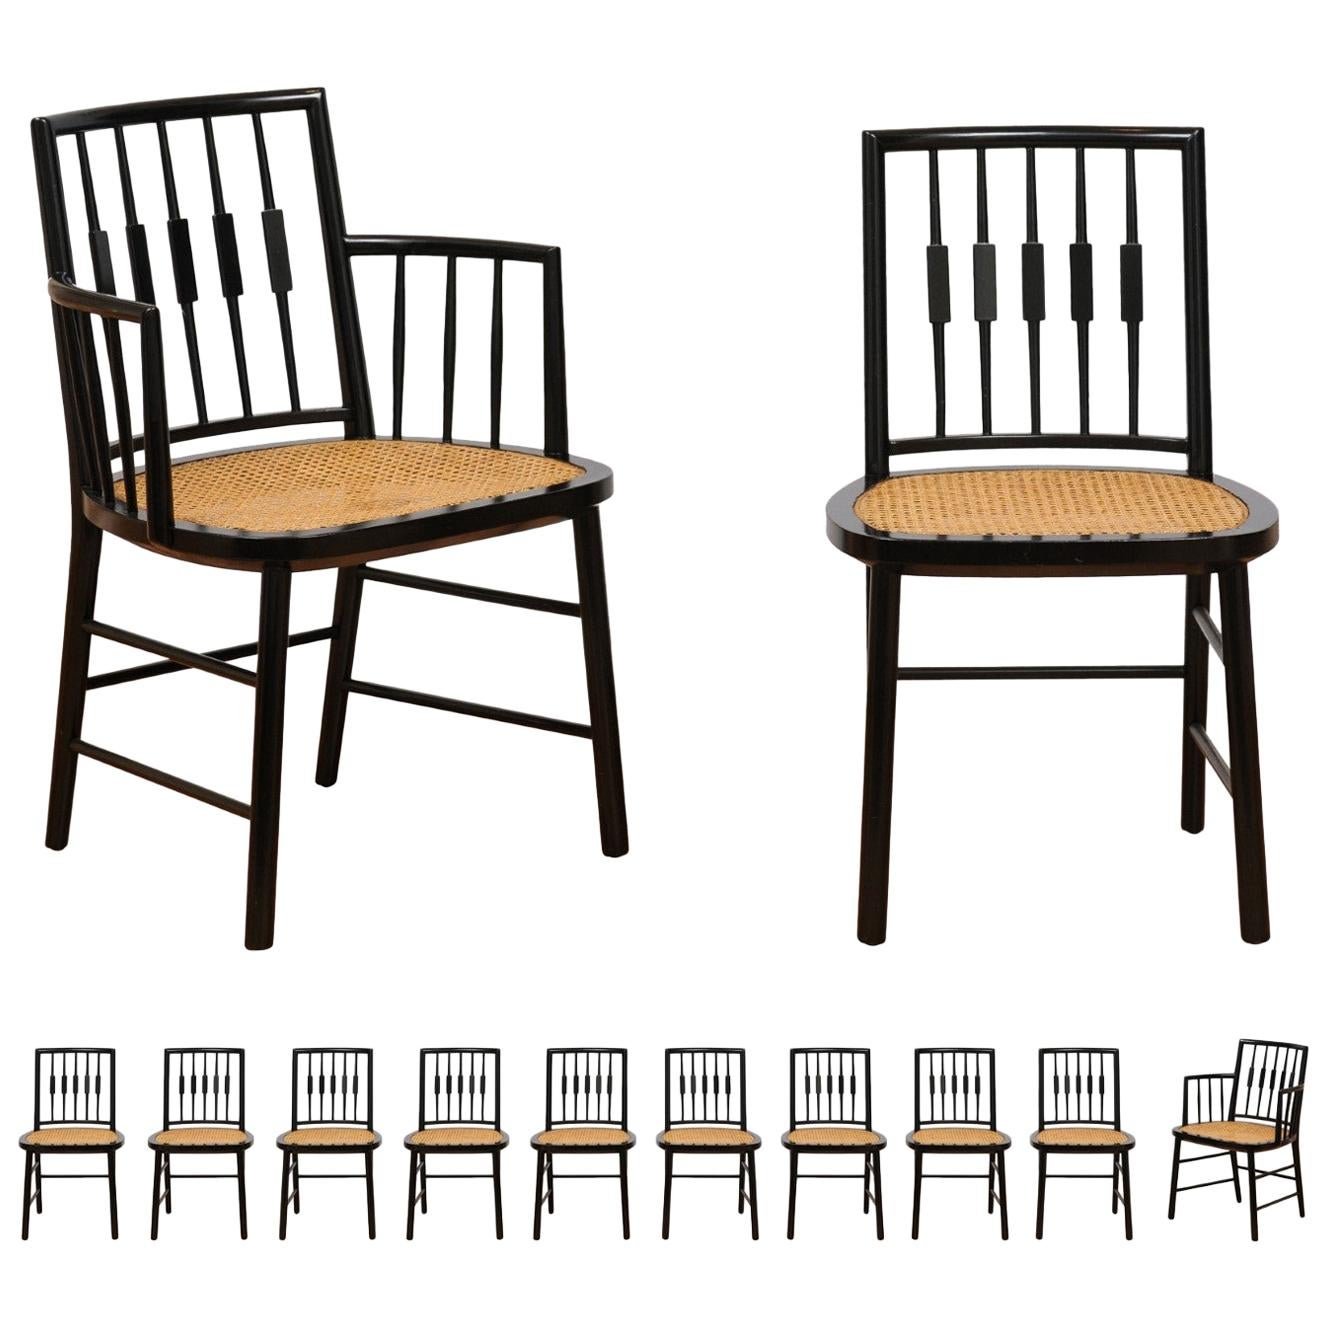 Stellar Set of 12 Modern Windsor Chairs by Michael Taylor, Cane Seats For Sale